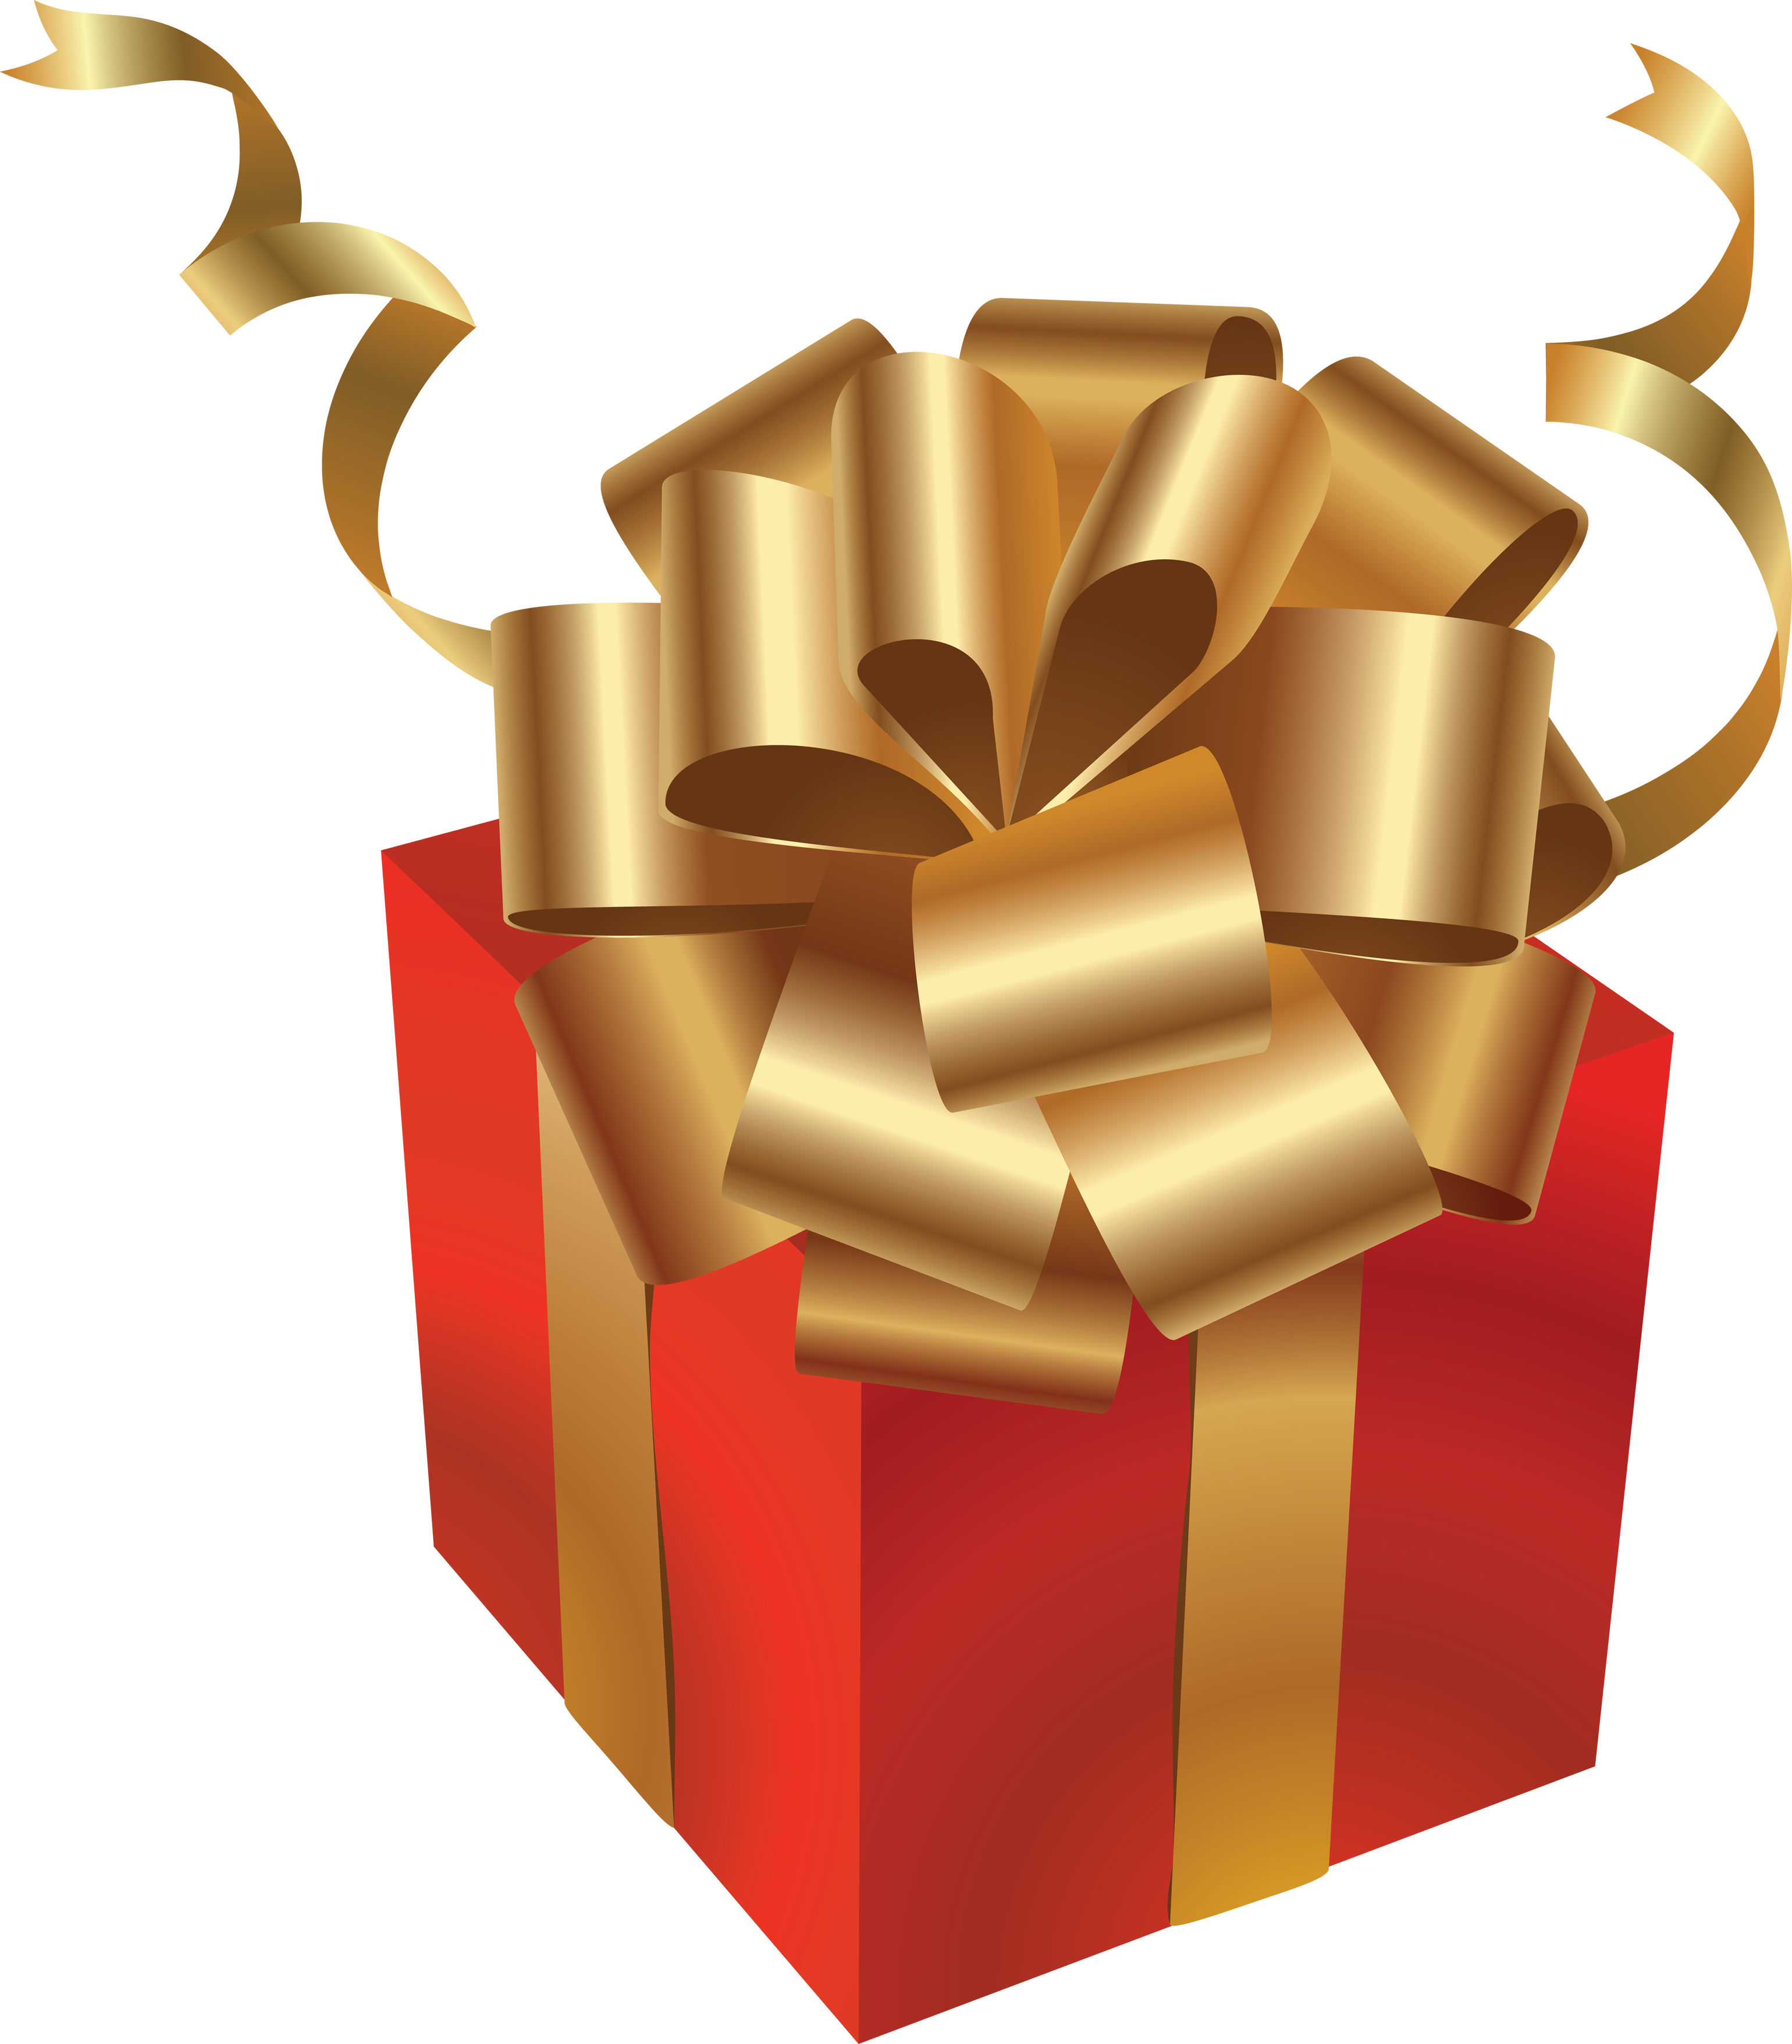 Gift Box Png Image - Gallery, Transparent background PNG HD thumbnail